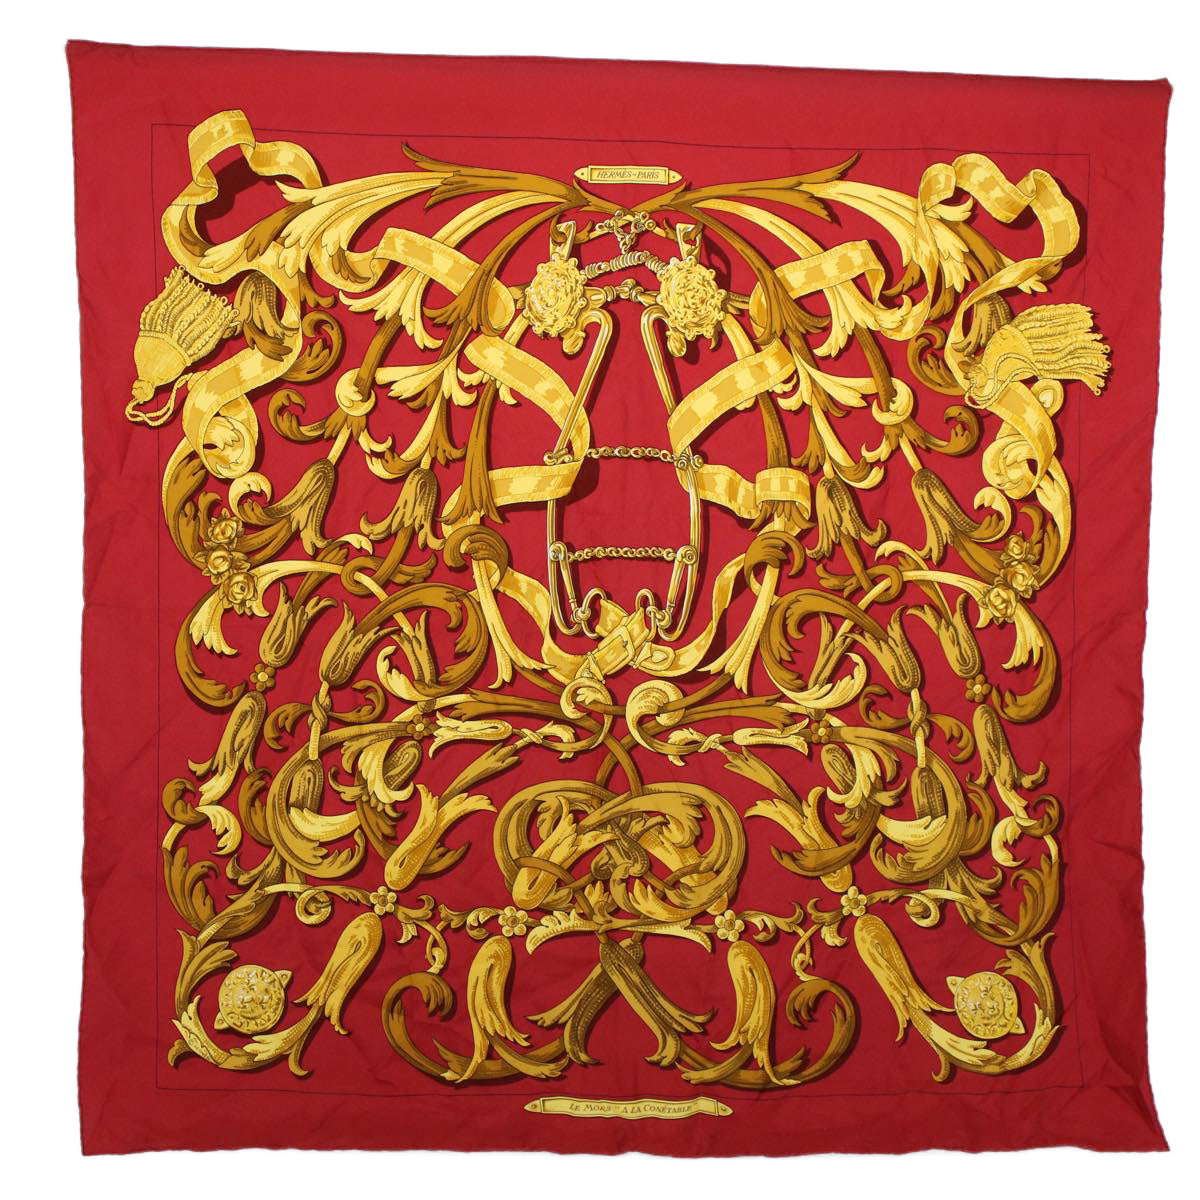 HERMES Carre 90 LE MORS A LA CONETABLE Scarf Silk Red Yellow Auth 57807